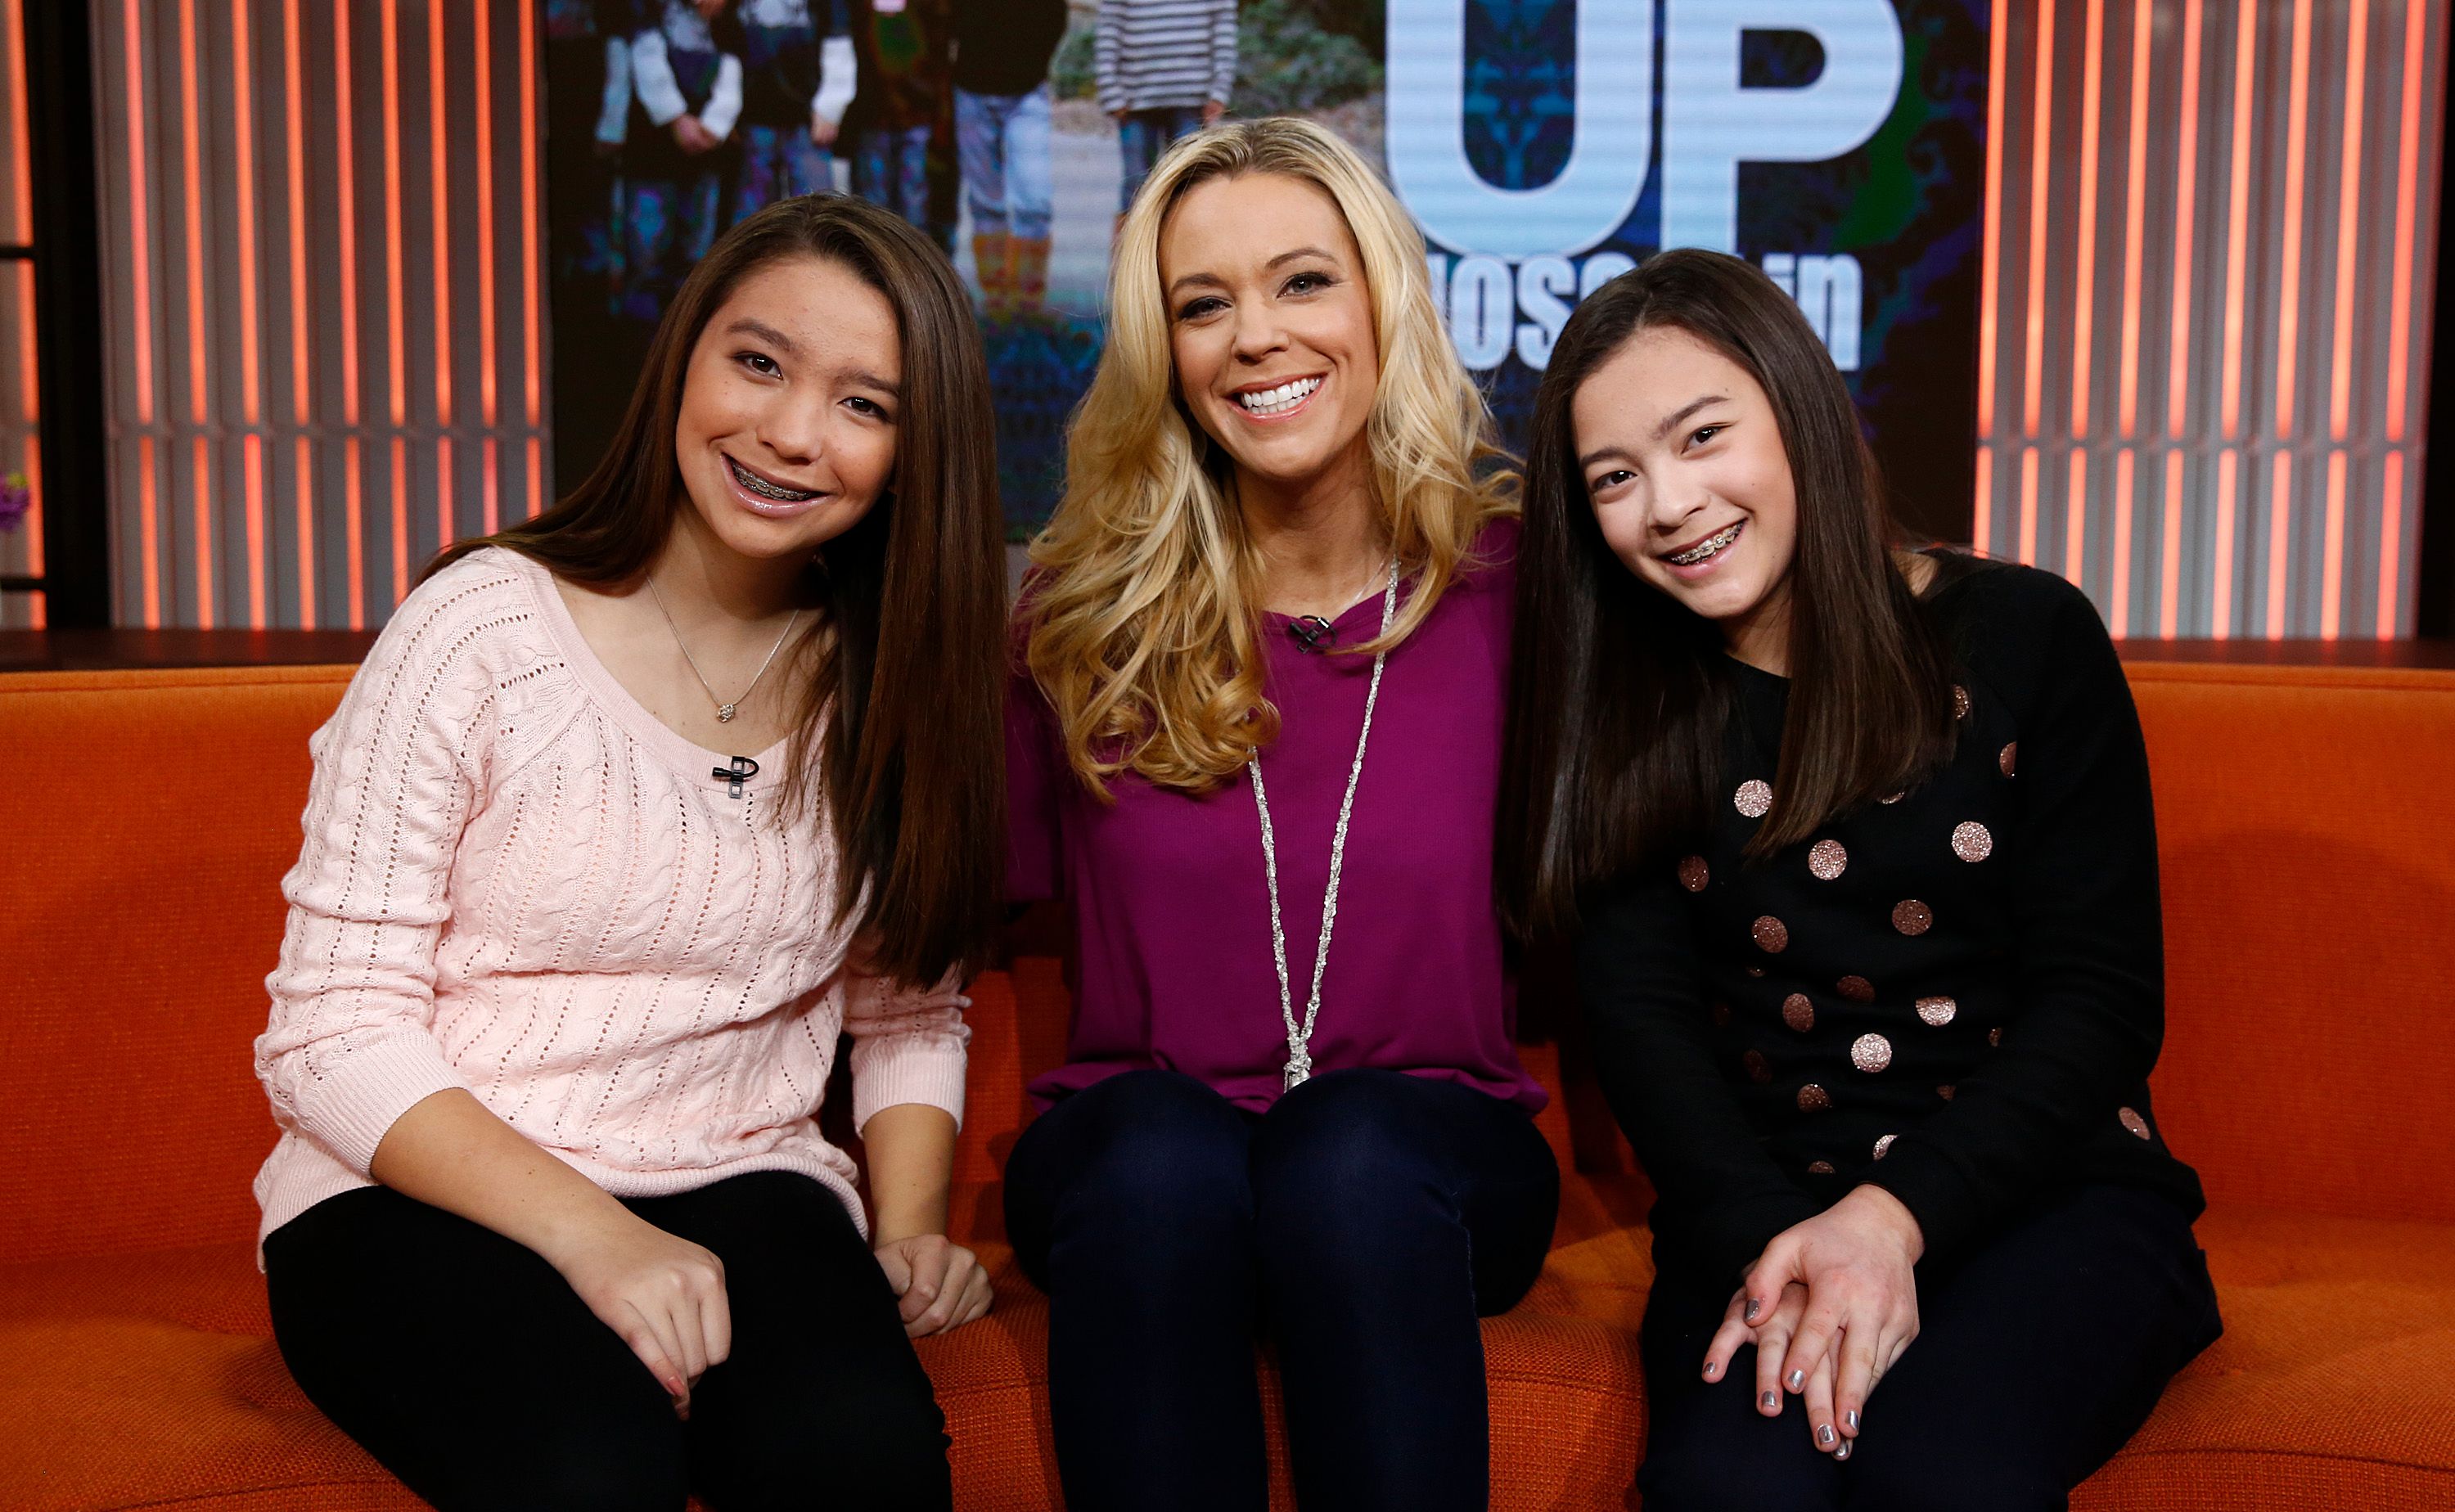 Cara, Kate, and Mady Gosselin appear on season 63 of the "Today" show on January 16, 2014 | Photo: Peter Kramer/NBC/NBC Newswire/NBCUniversal/Getty Images